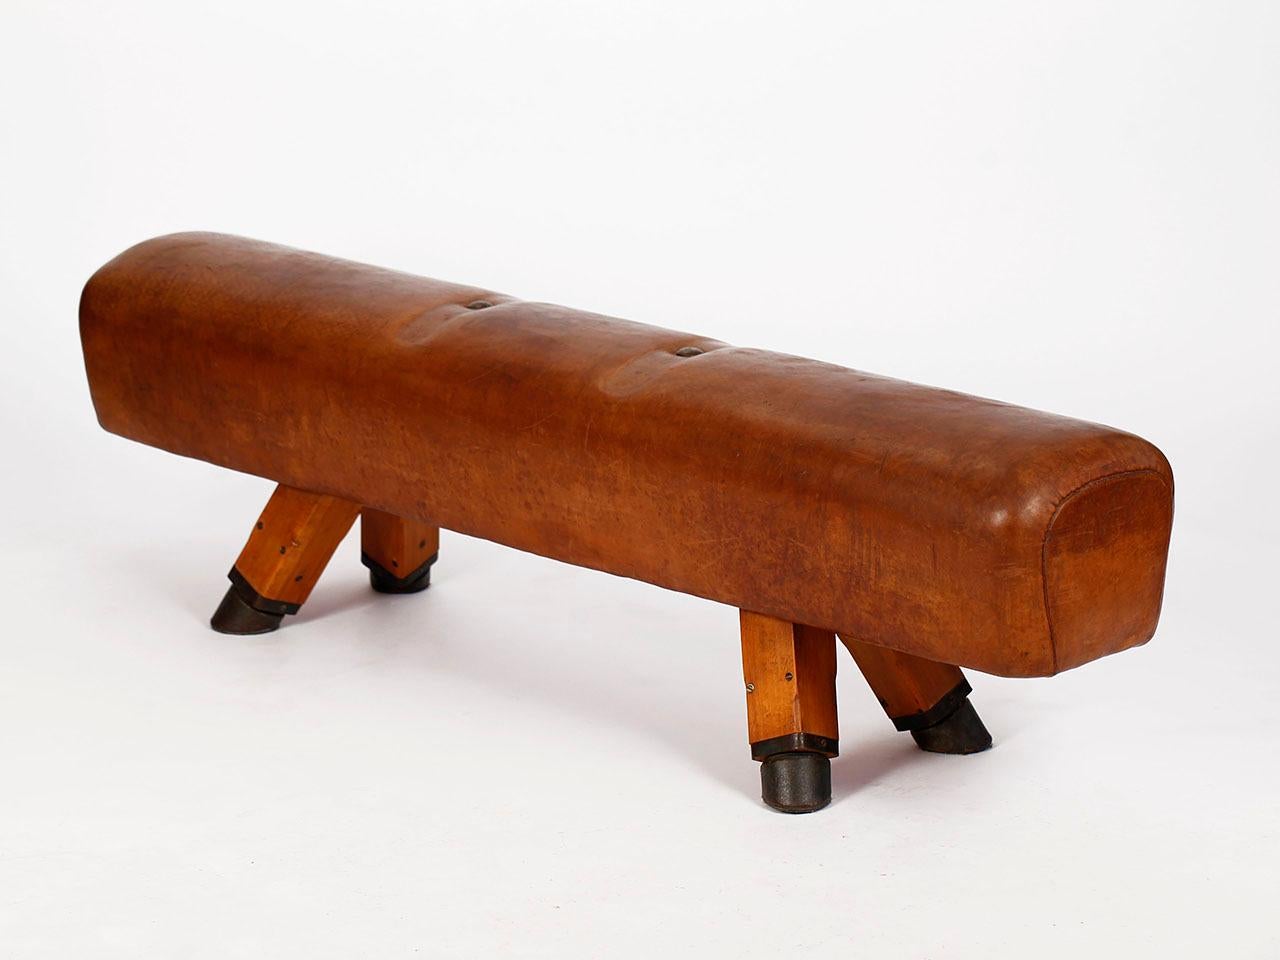 Pommel horse from former Czechoslovakia. It has been shortened to a height of 51 cm. The iron feet are preserved. The thick leather has been cleaned, restored wood surface and the patina was retained. Very good vintage condition. Completely